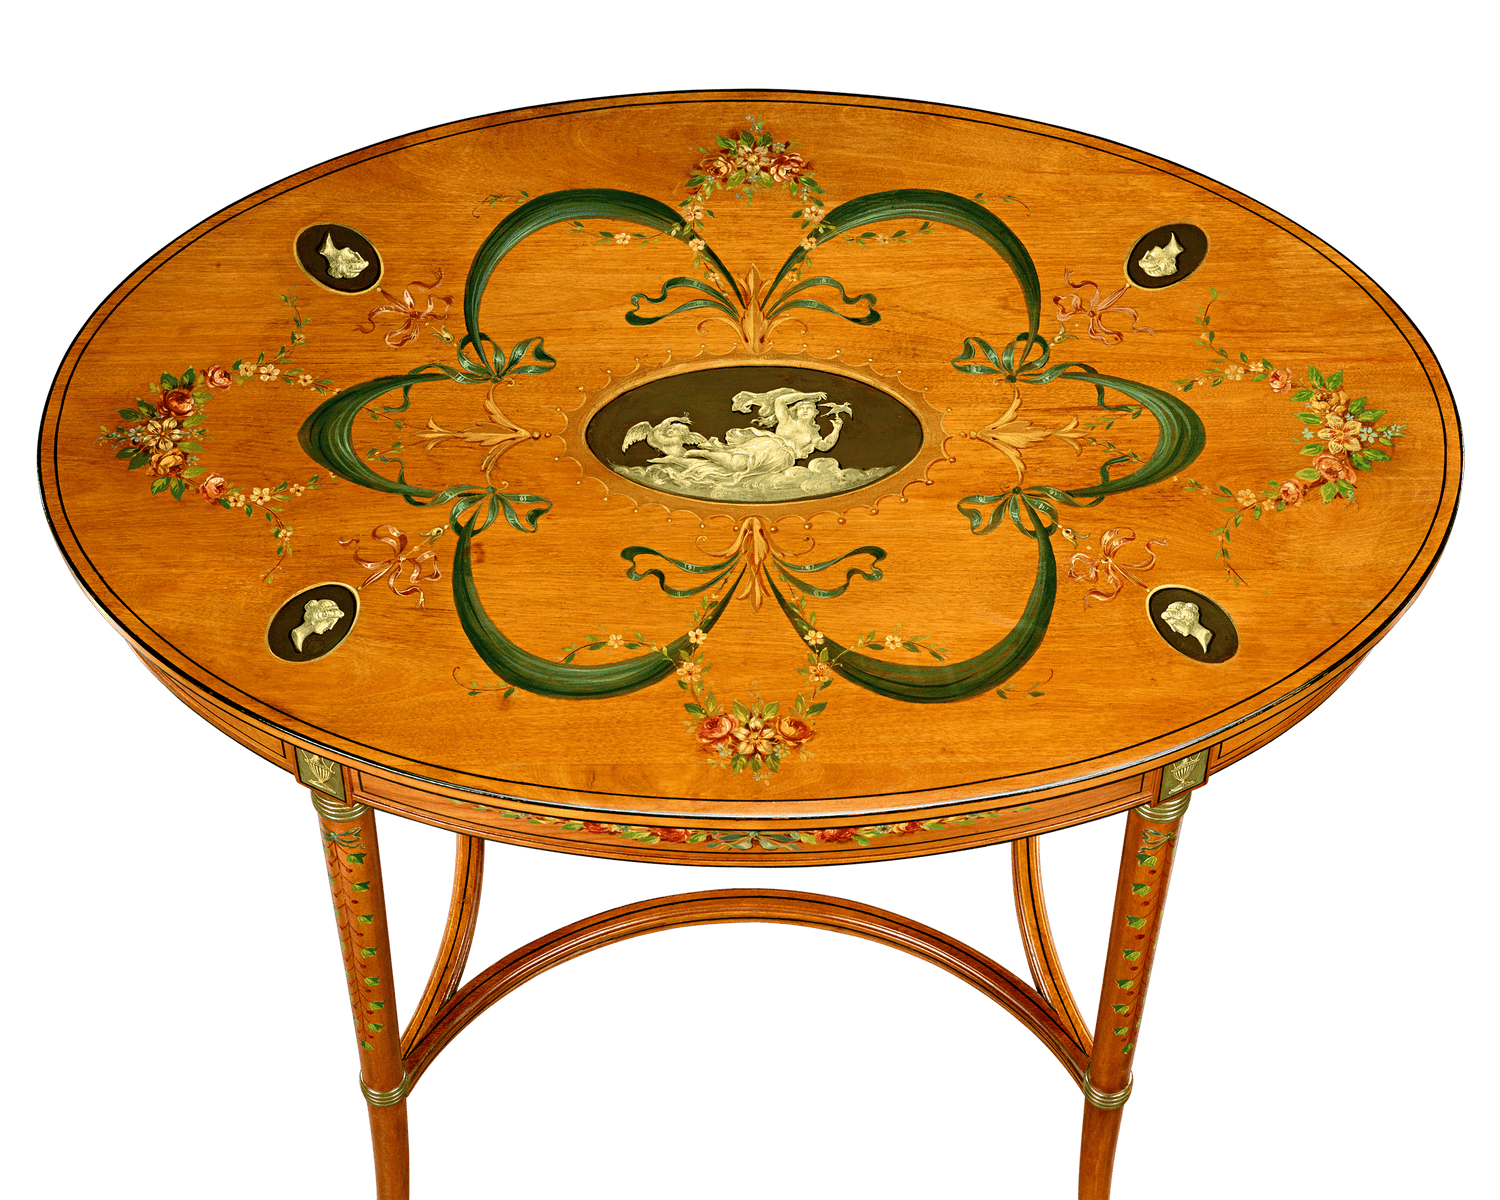 English Satinwood Parlor Tables